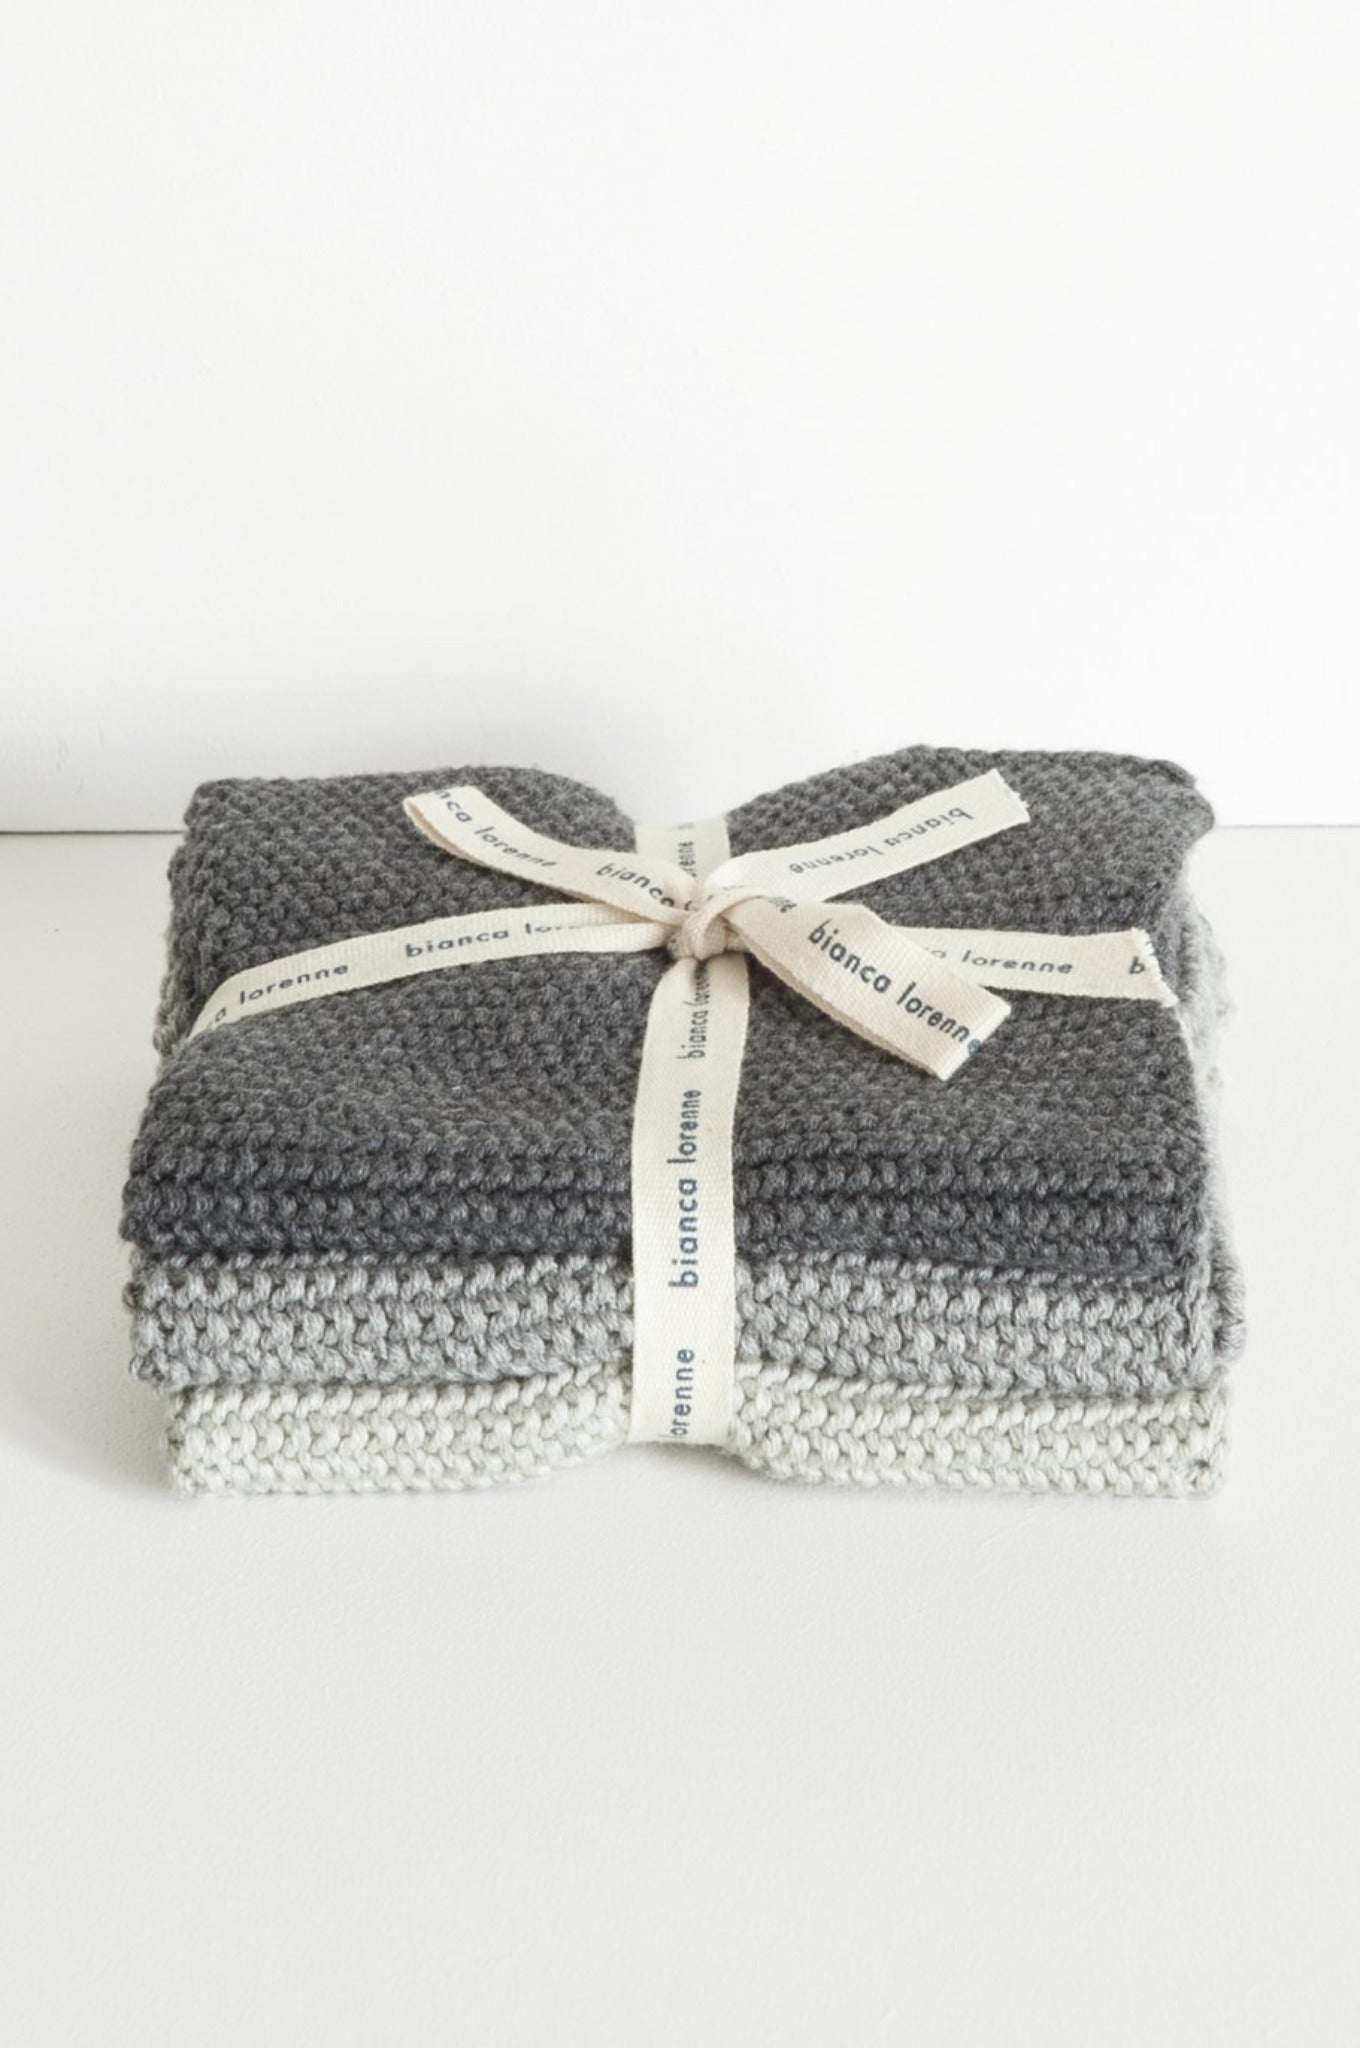 Bianca Lorenne pure cotton knitted washcloths, set of 3 in shades of charcoal grey.